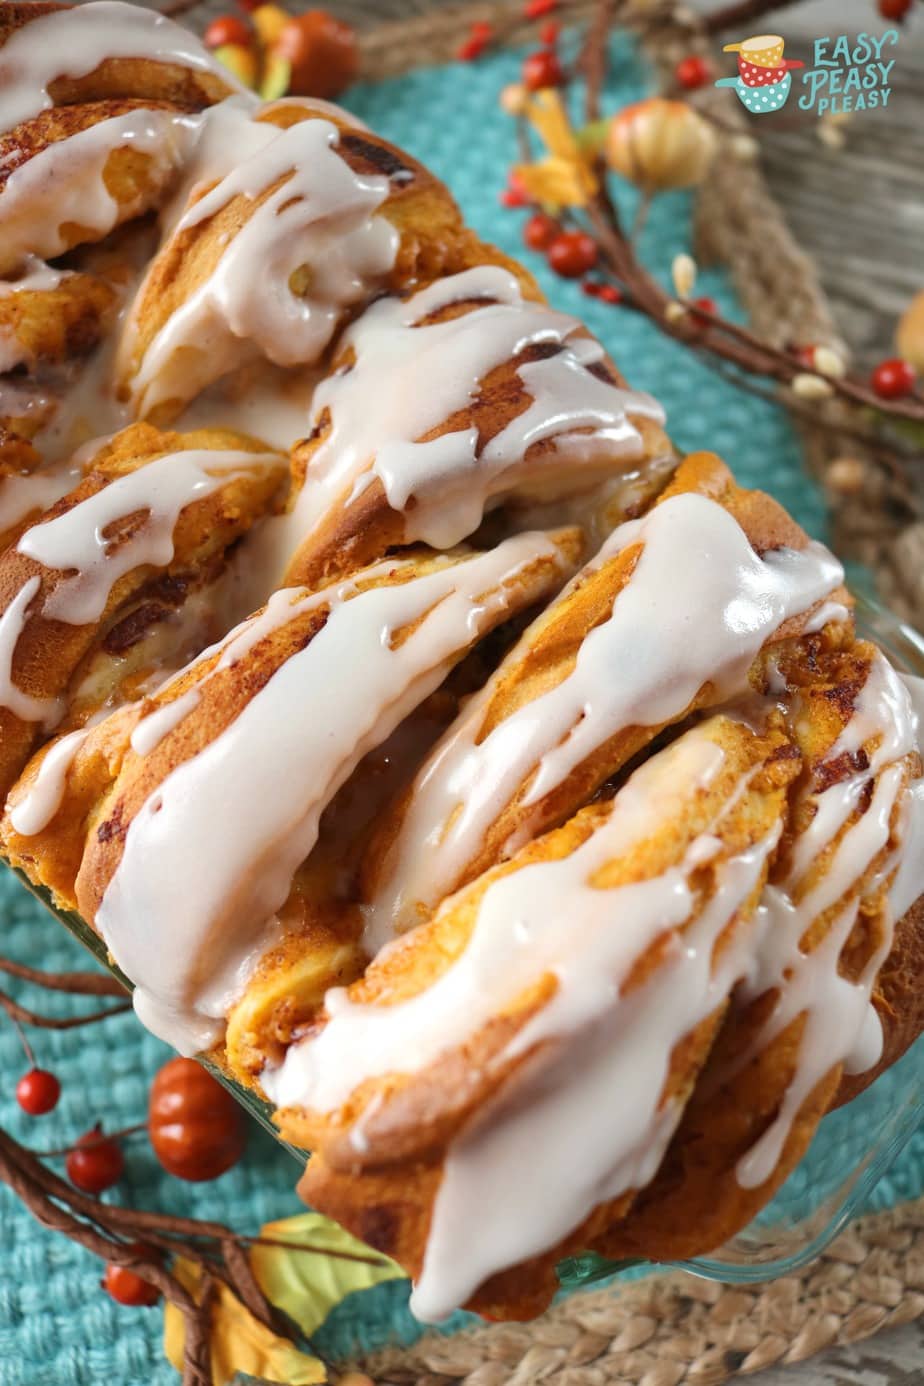 Use a can of cinnamon rolls and 4 other ingredients to make this fabulously fall favorite Pumpkin Pull Apart Bread.